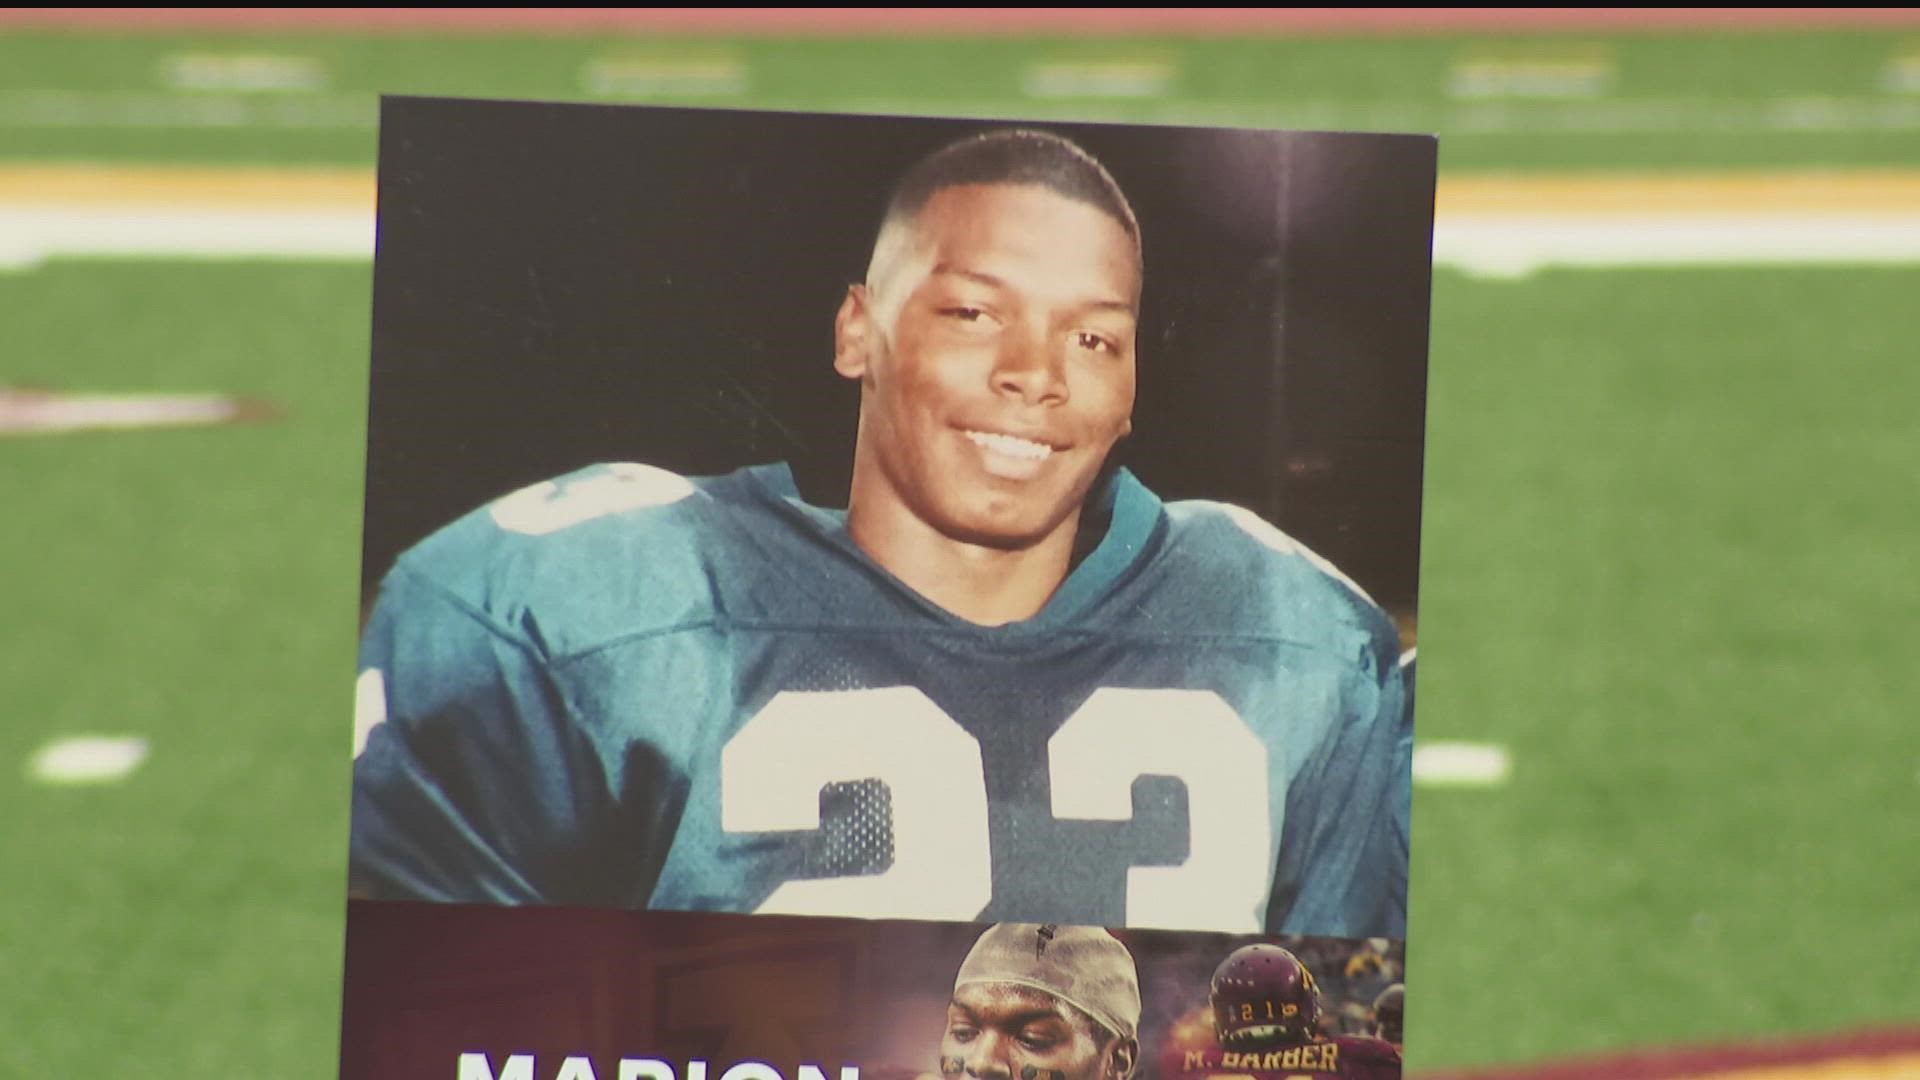 Family and friends gathered for a celebration of life at Huntington Bank Stadium, sharing their memories and the legacy left by the late running back.